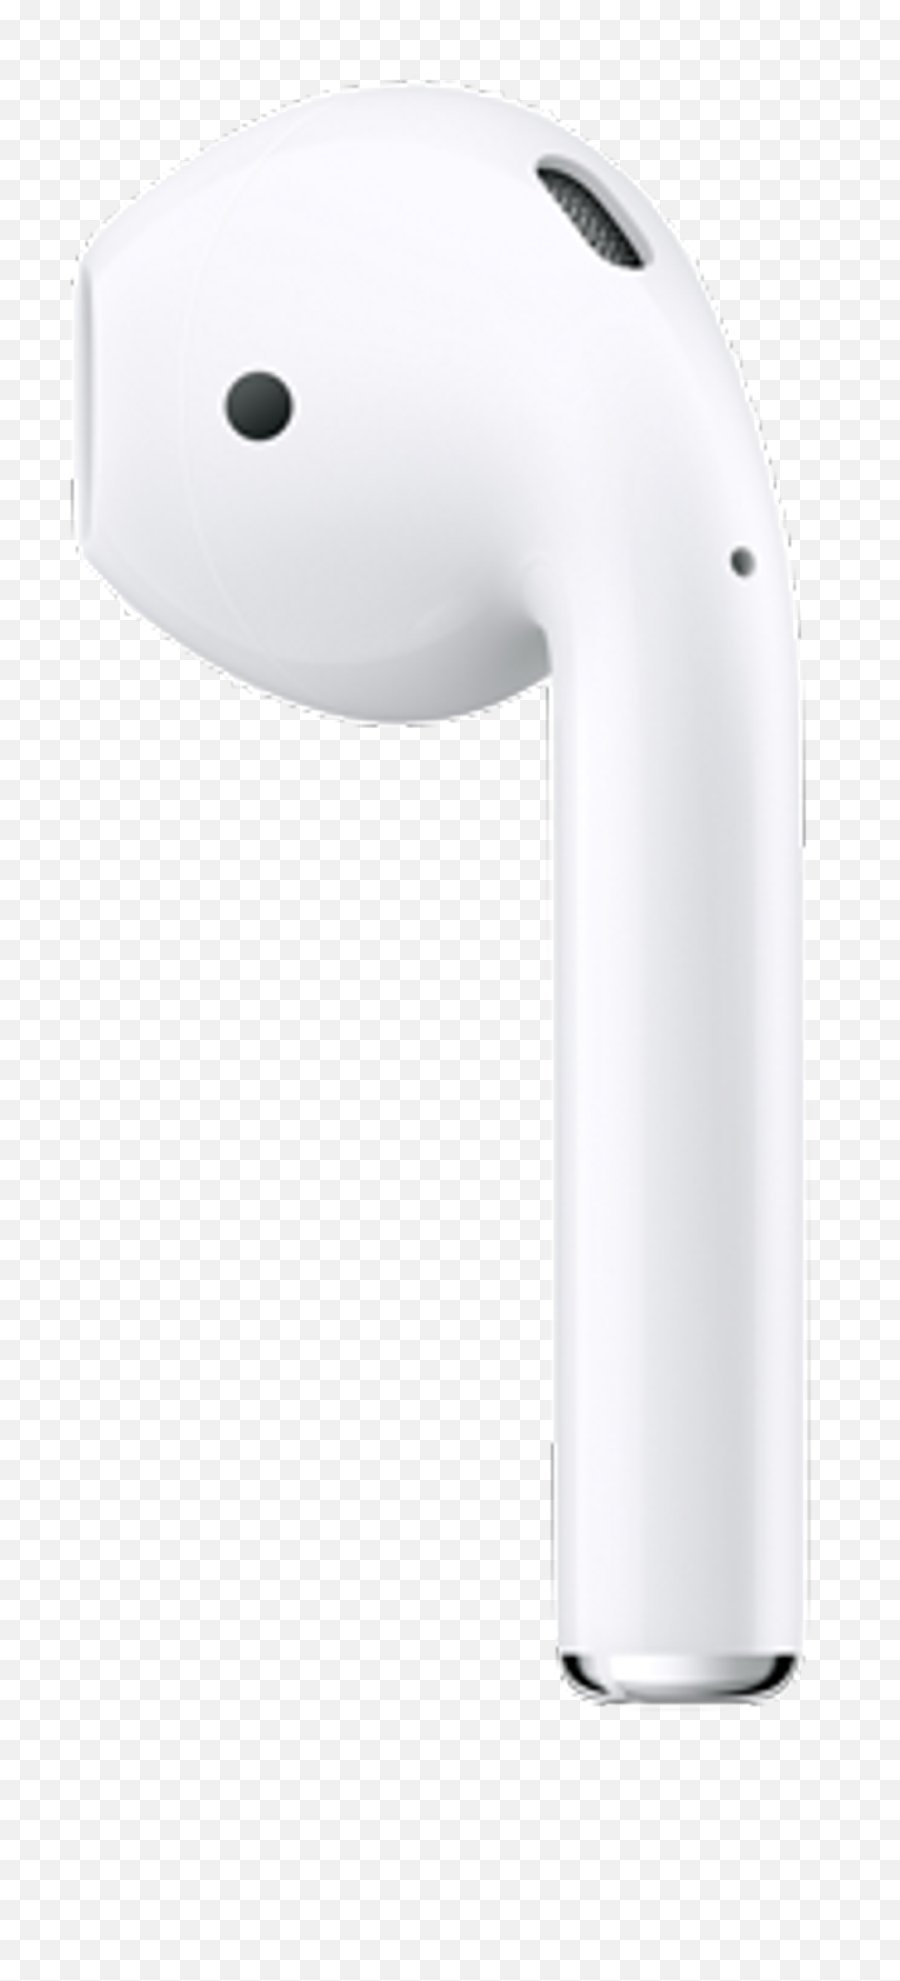 Download Angle Airpods Tap Apple Free Png Hq Image - Clear Background Airpod Png,Free Png Images With Transparent Background